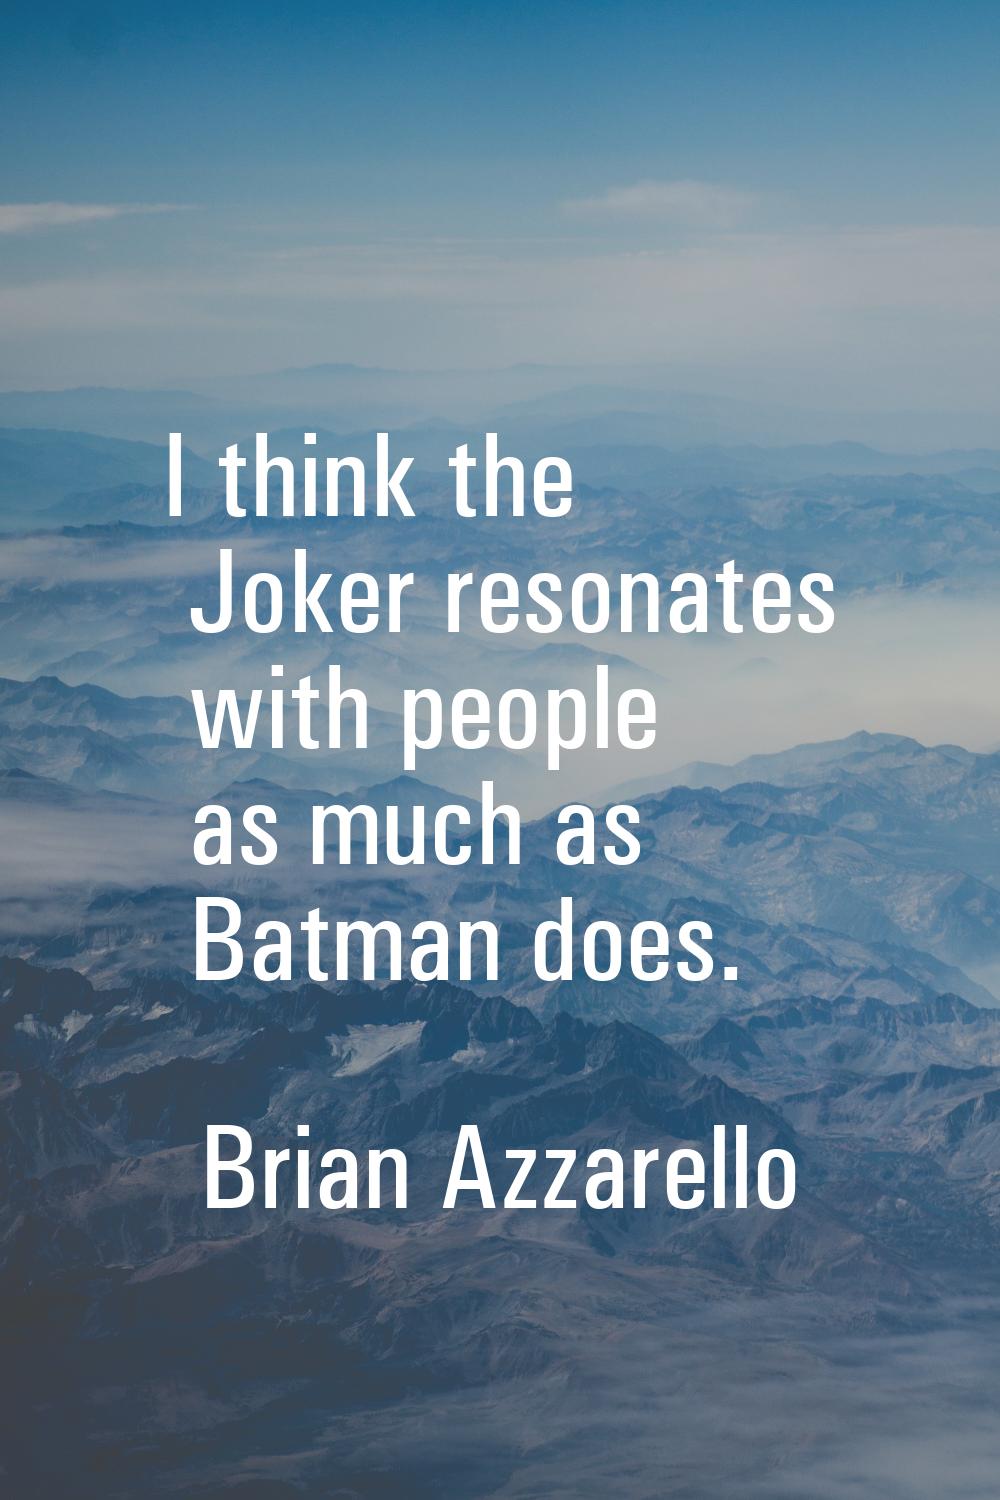 I think the Joker resonates with people as much as Batman does.